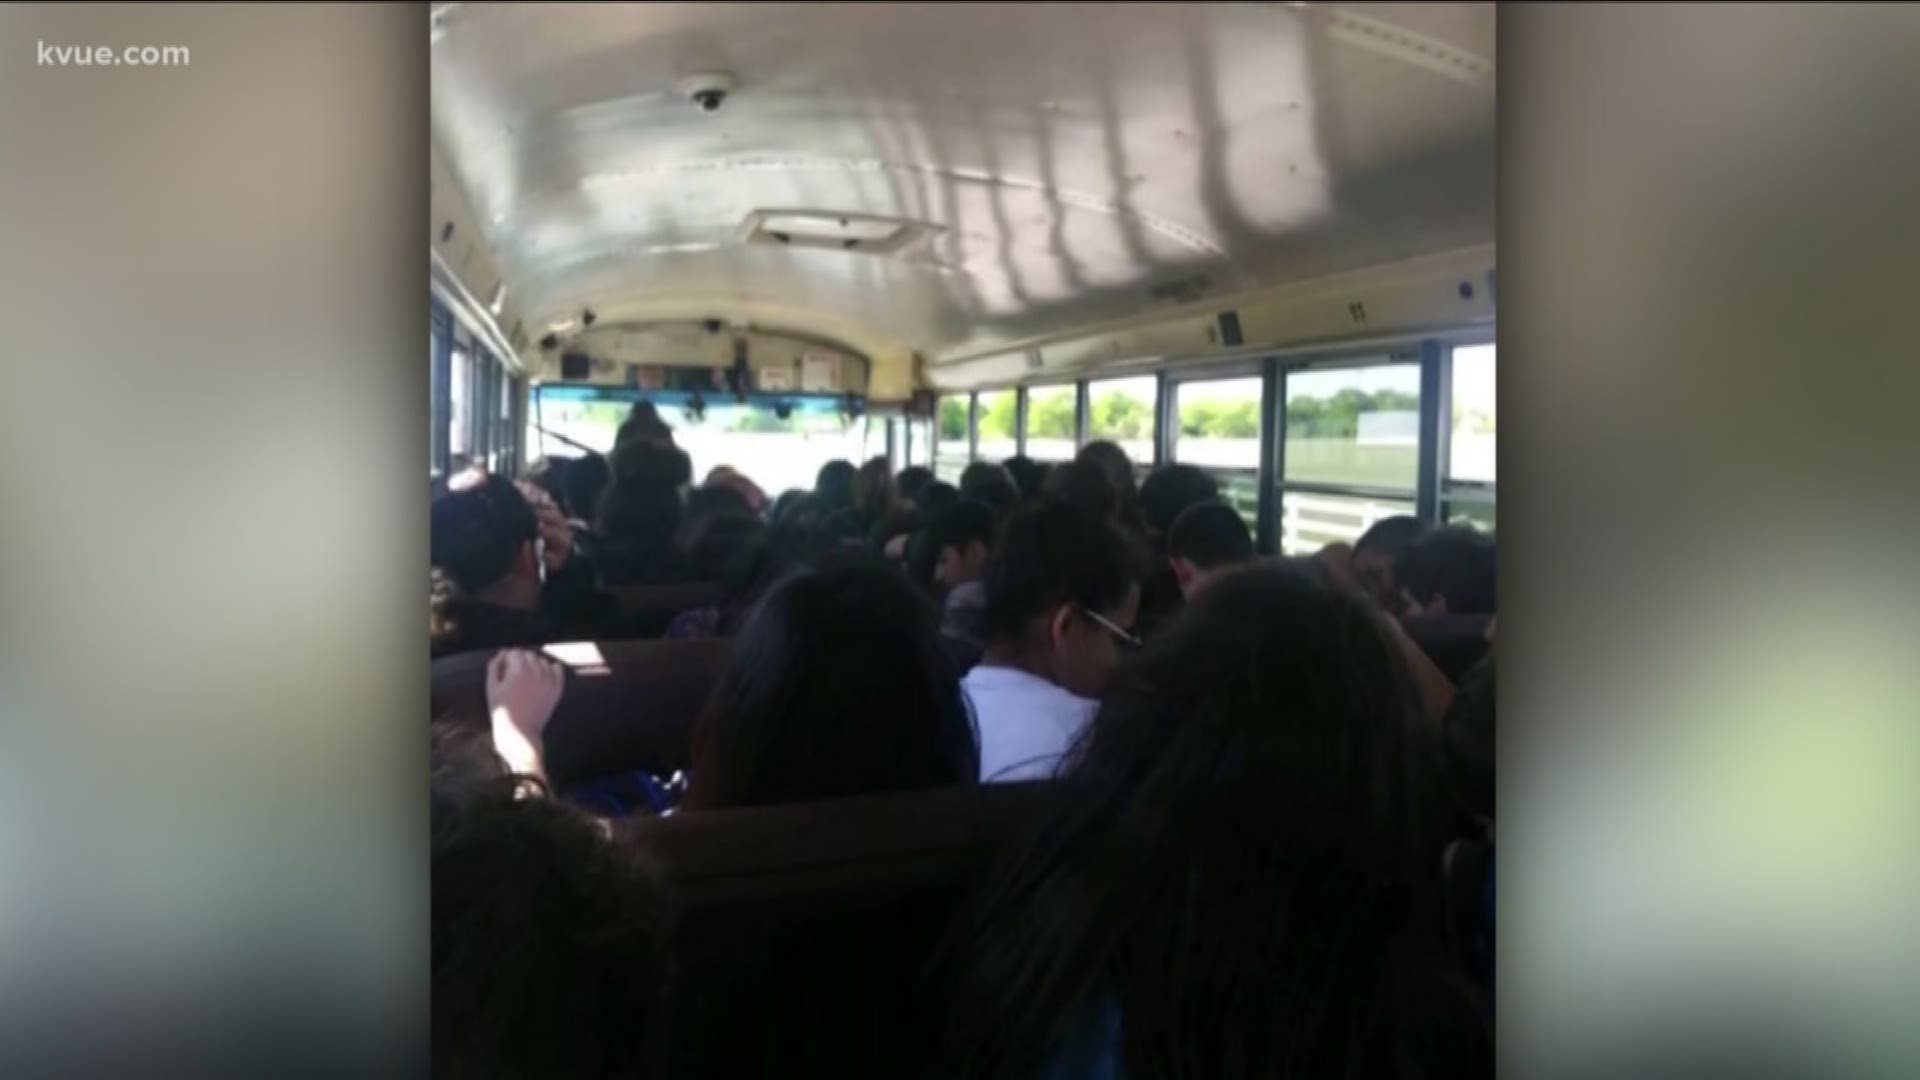 A new fleet of busses is coming to Pflugerville ISD after some complained the district’s buses were overcrowded.